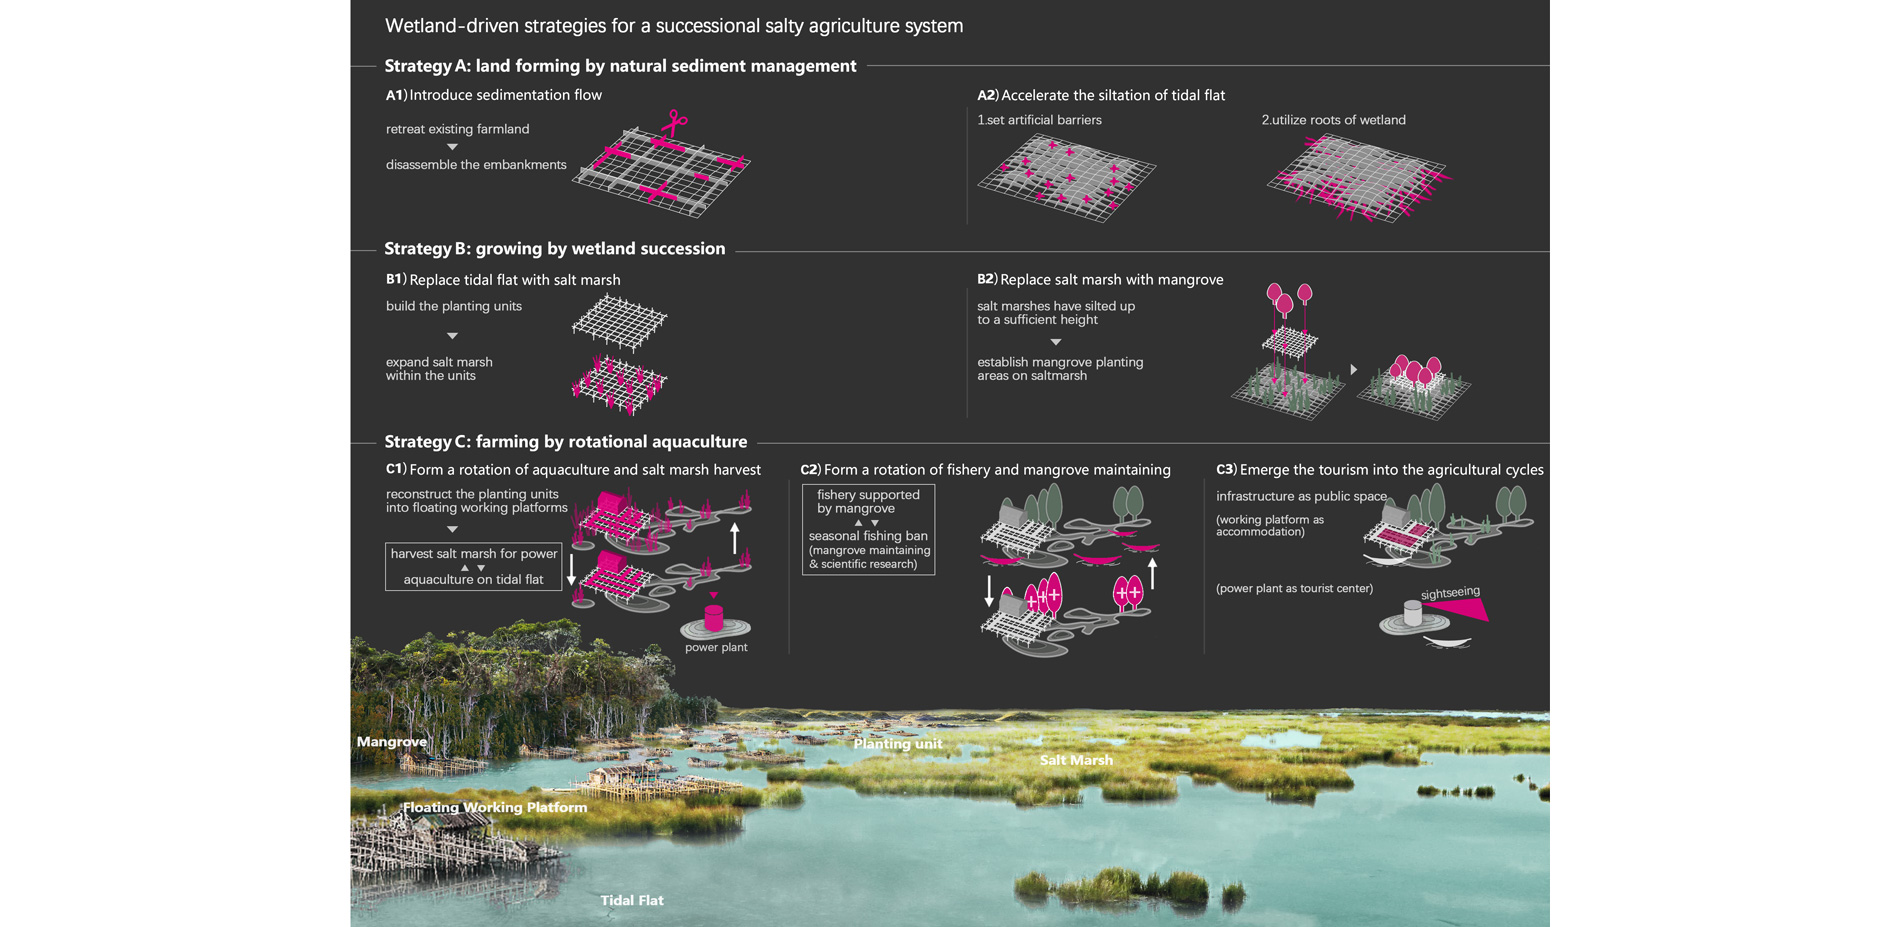 Wetland-driven strategies for a successional salty agriculture system